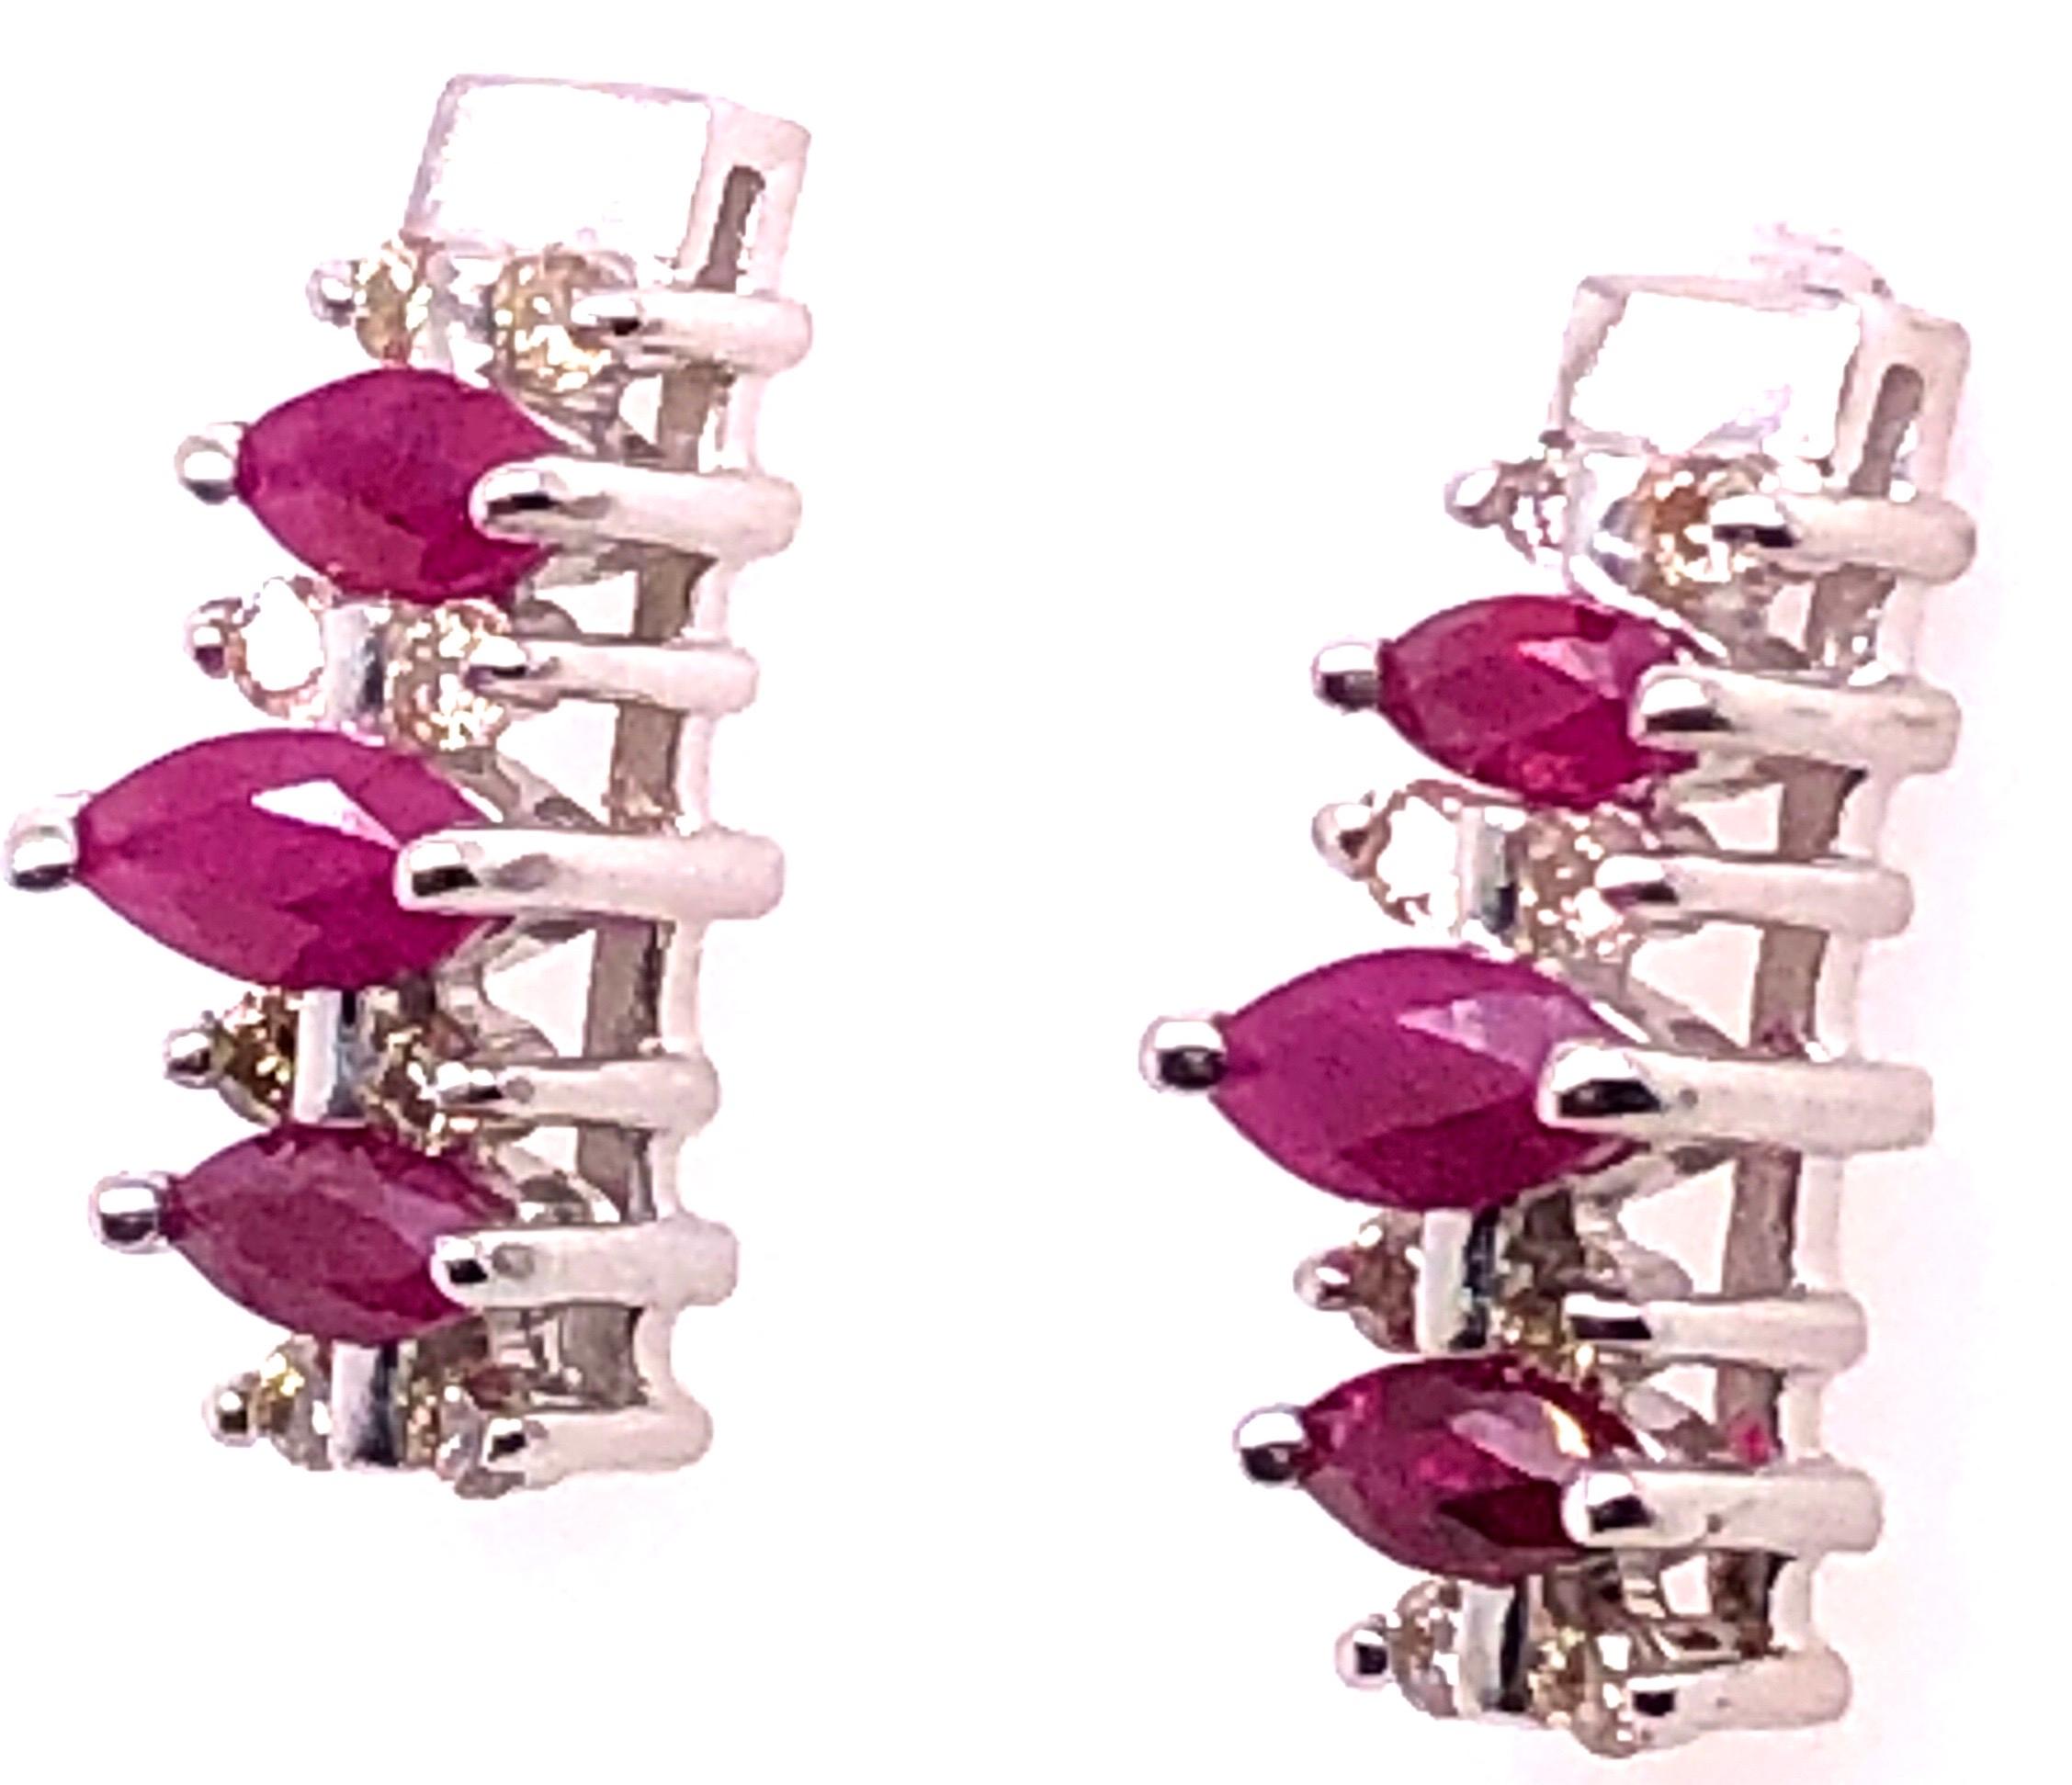 14 Karat White Gold Free Form Button Ruby Earrings with Diamonds.
0.32 total diamond weight.
2.53 grams total weight.